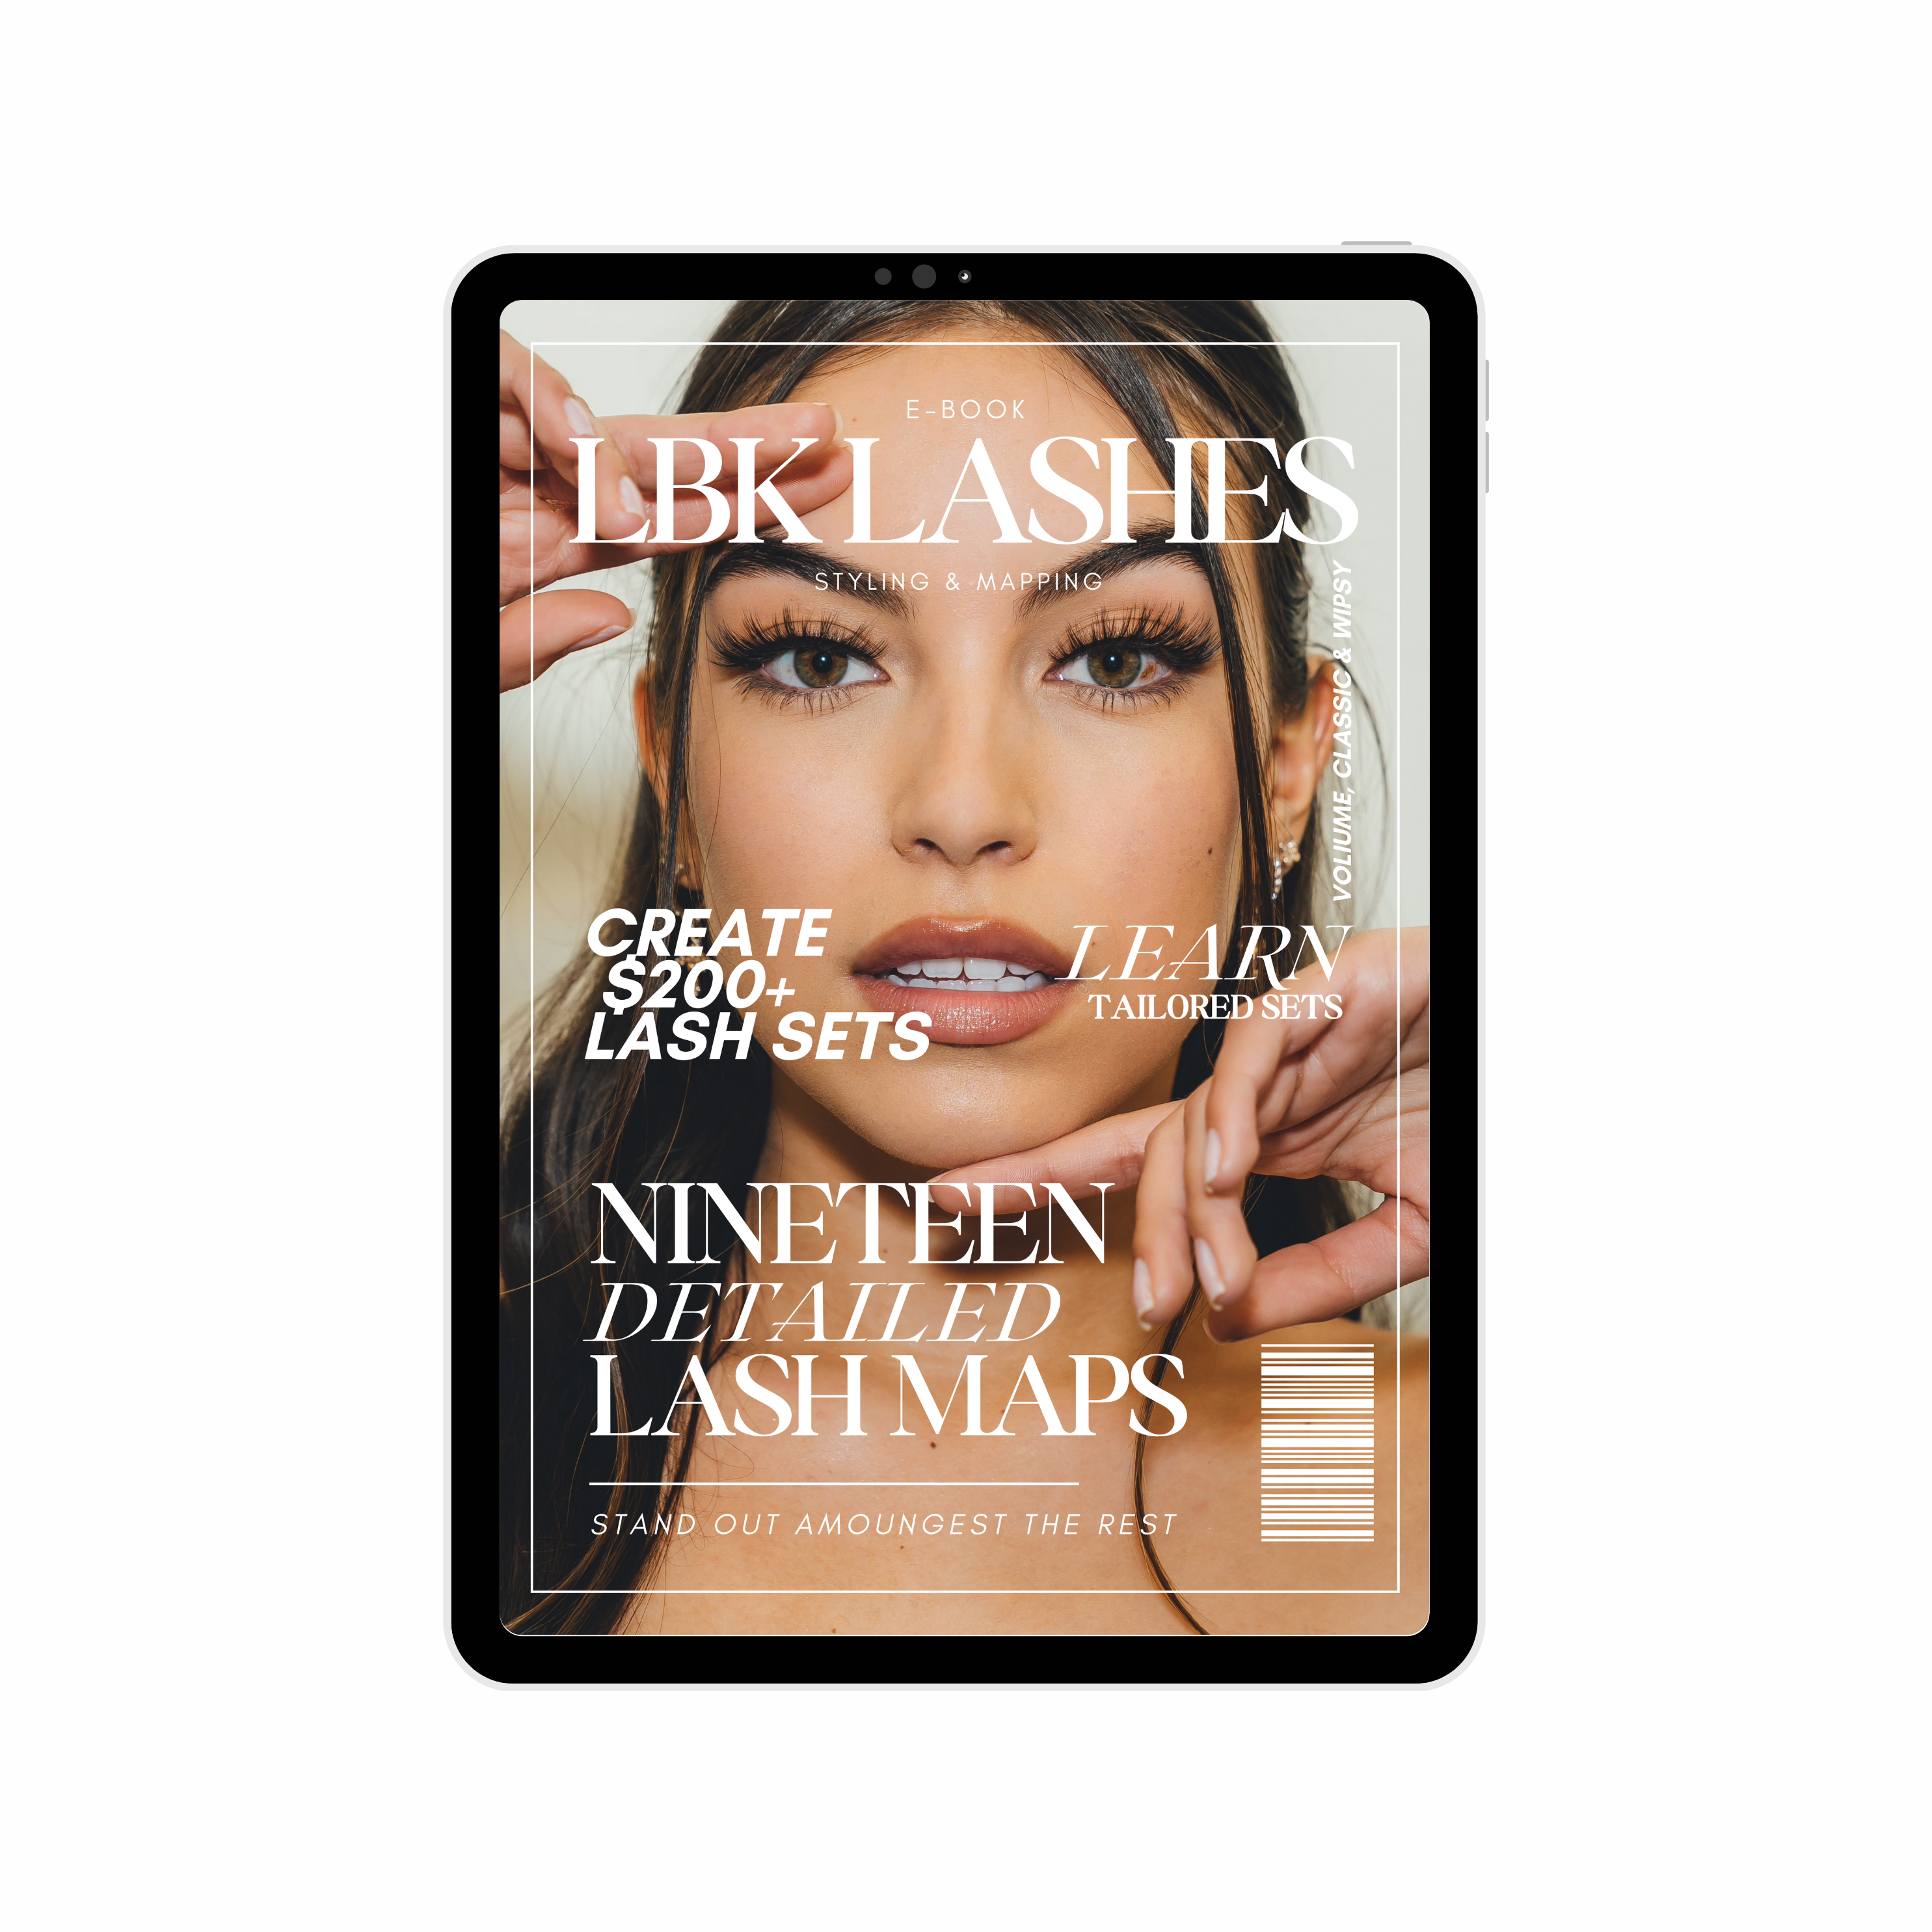 LBK LASHES Lashes By Kins LLC Lash Manual! The Lash Bible: Styling & Mapping E-Book